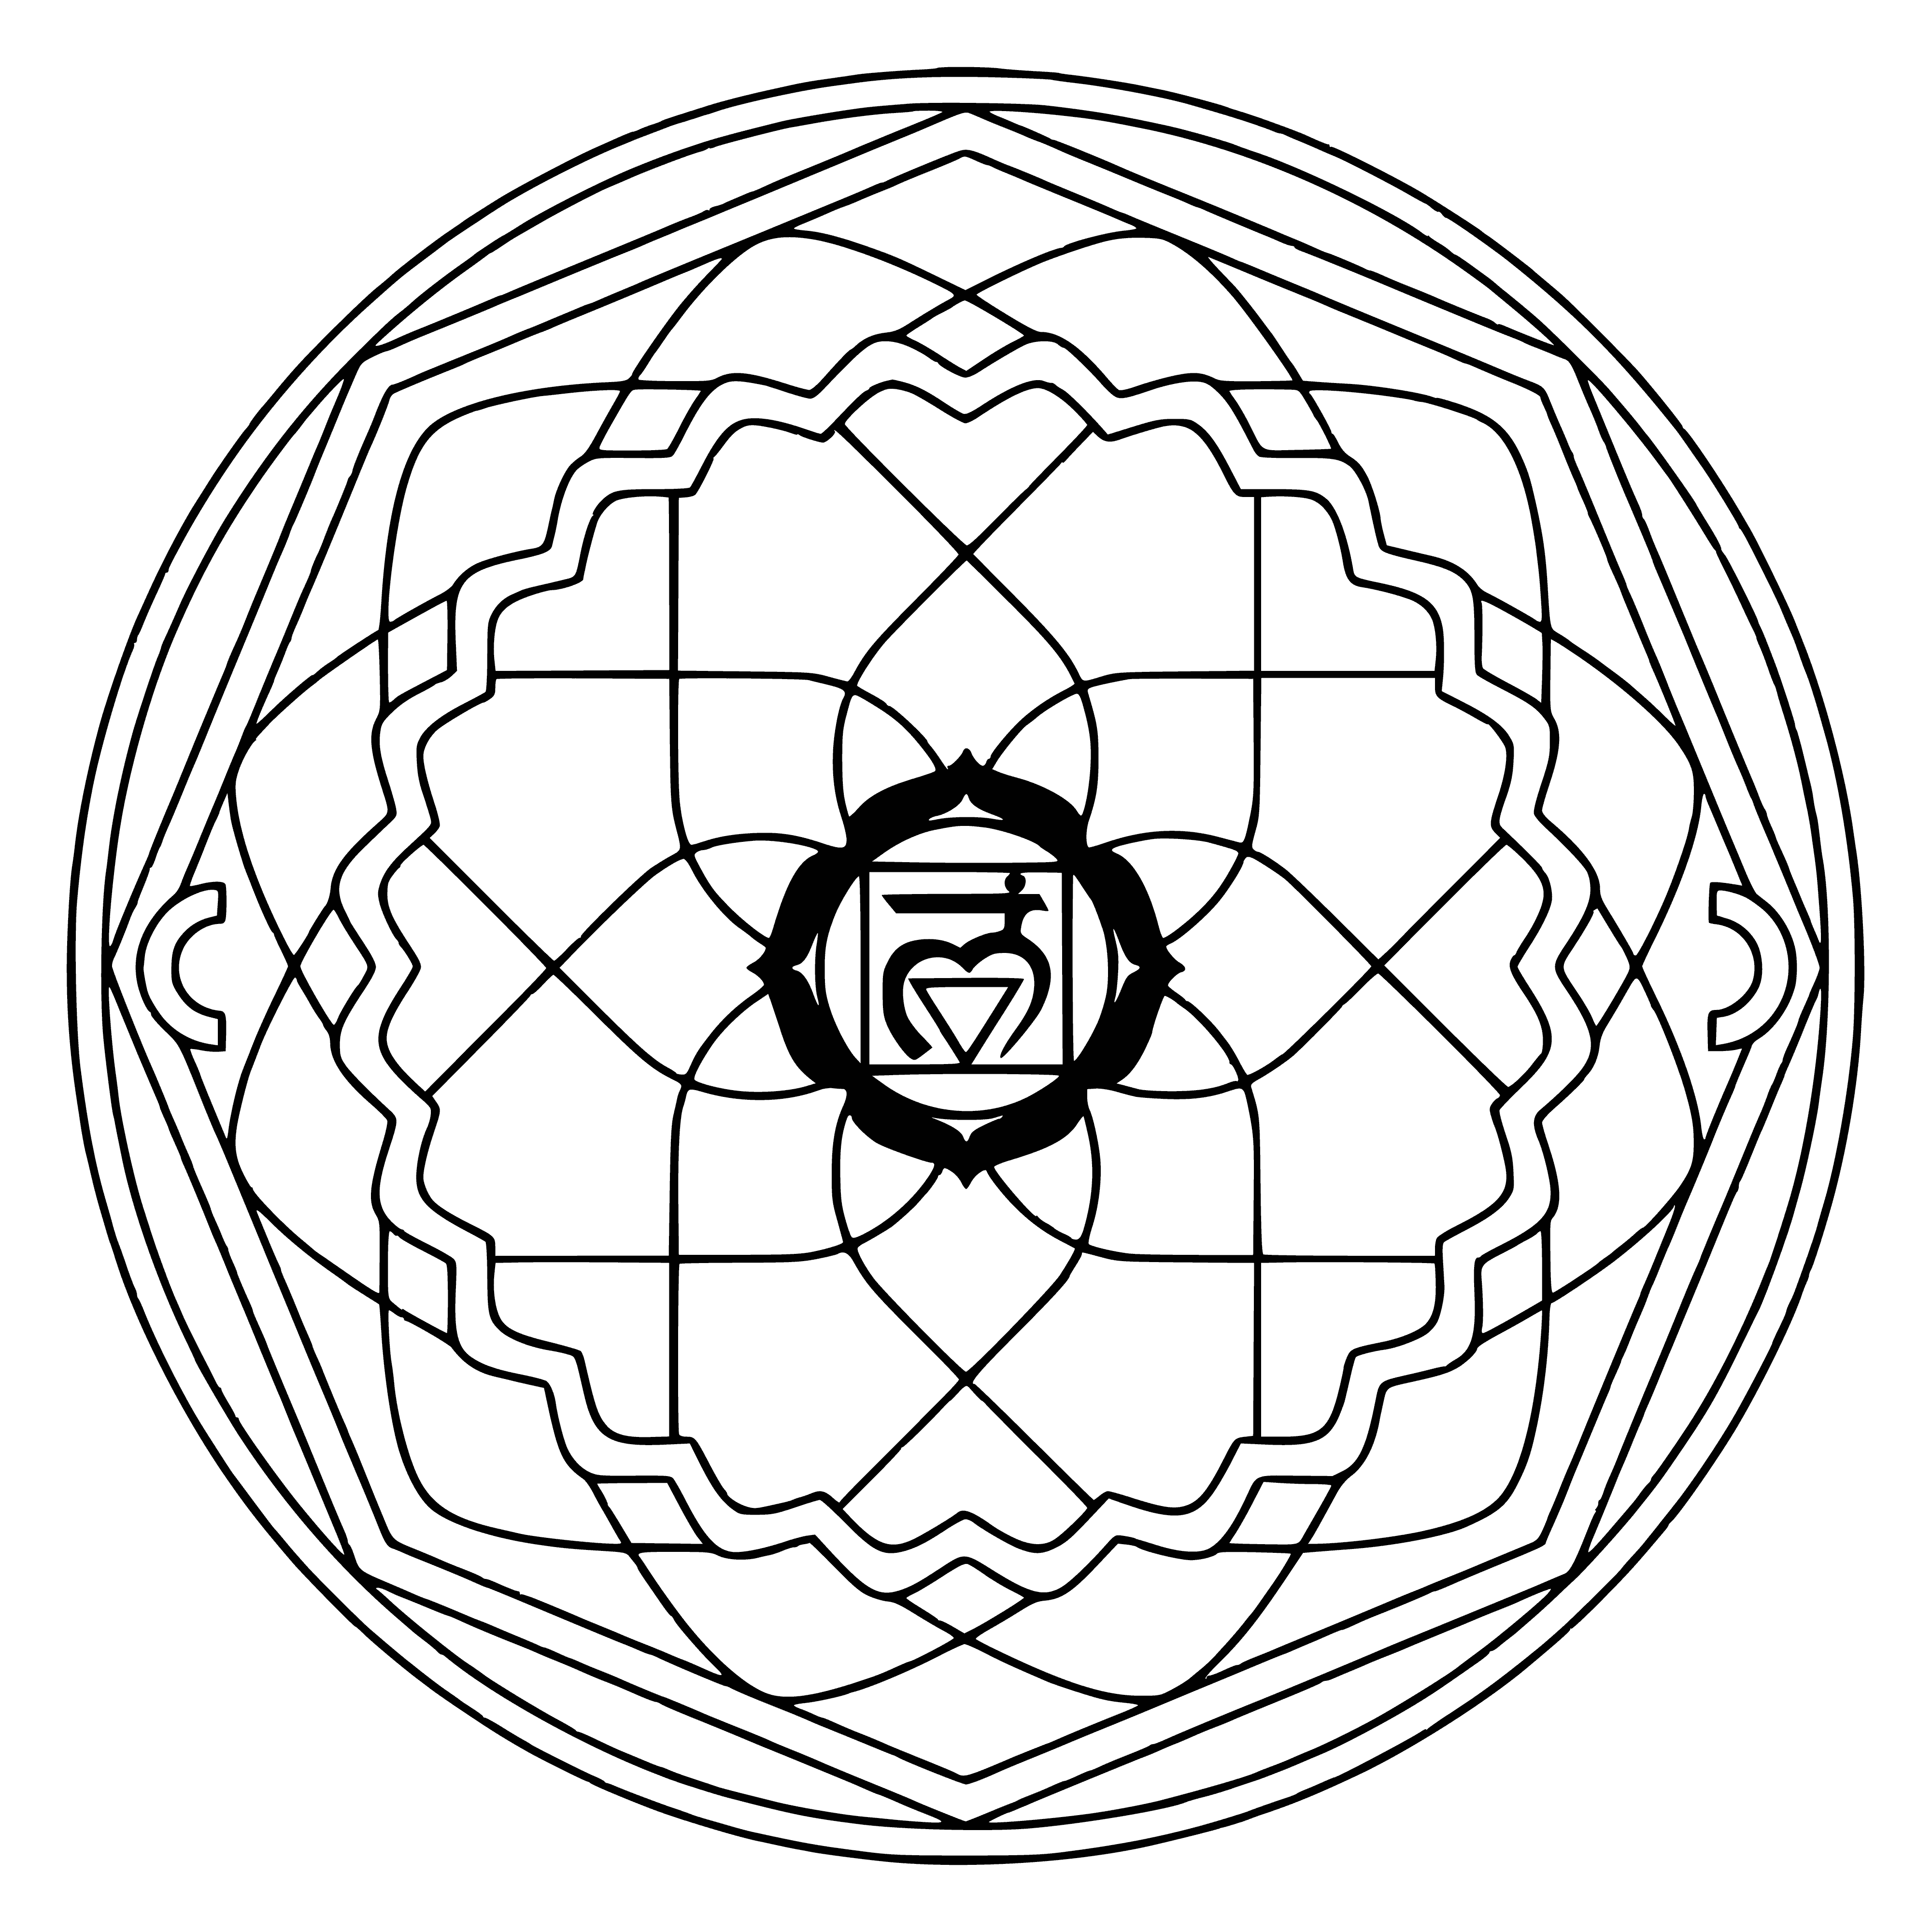 coloring page: Mandala of Muladhara Chakra symbolizing earth element, with 8 petals, 3 colored triangles, and blue/white border.